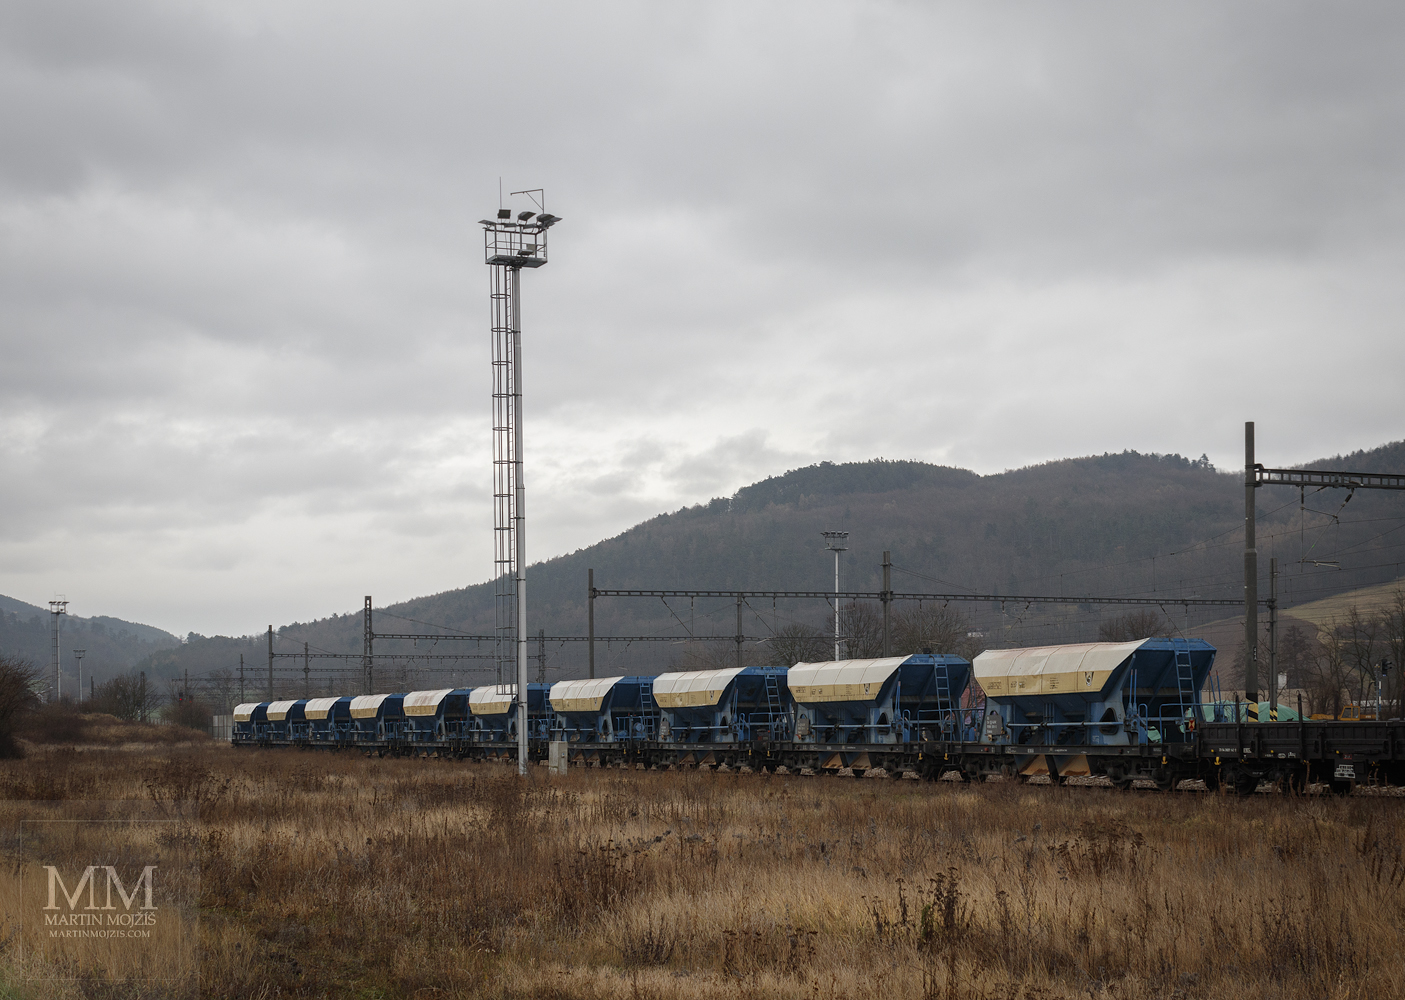 Blue Faccs wagons, in the background the Holy hill. Zdice station in new.